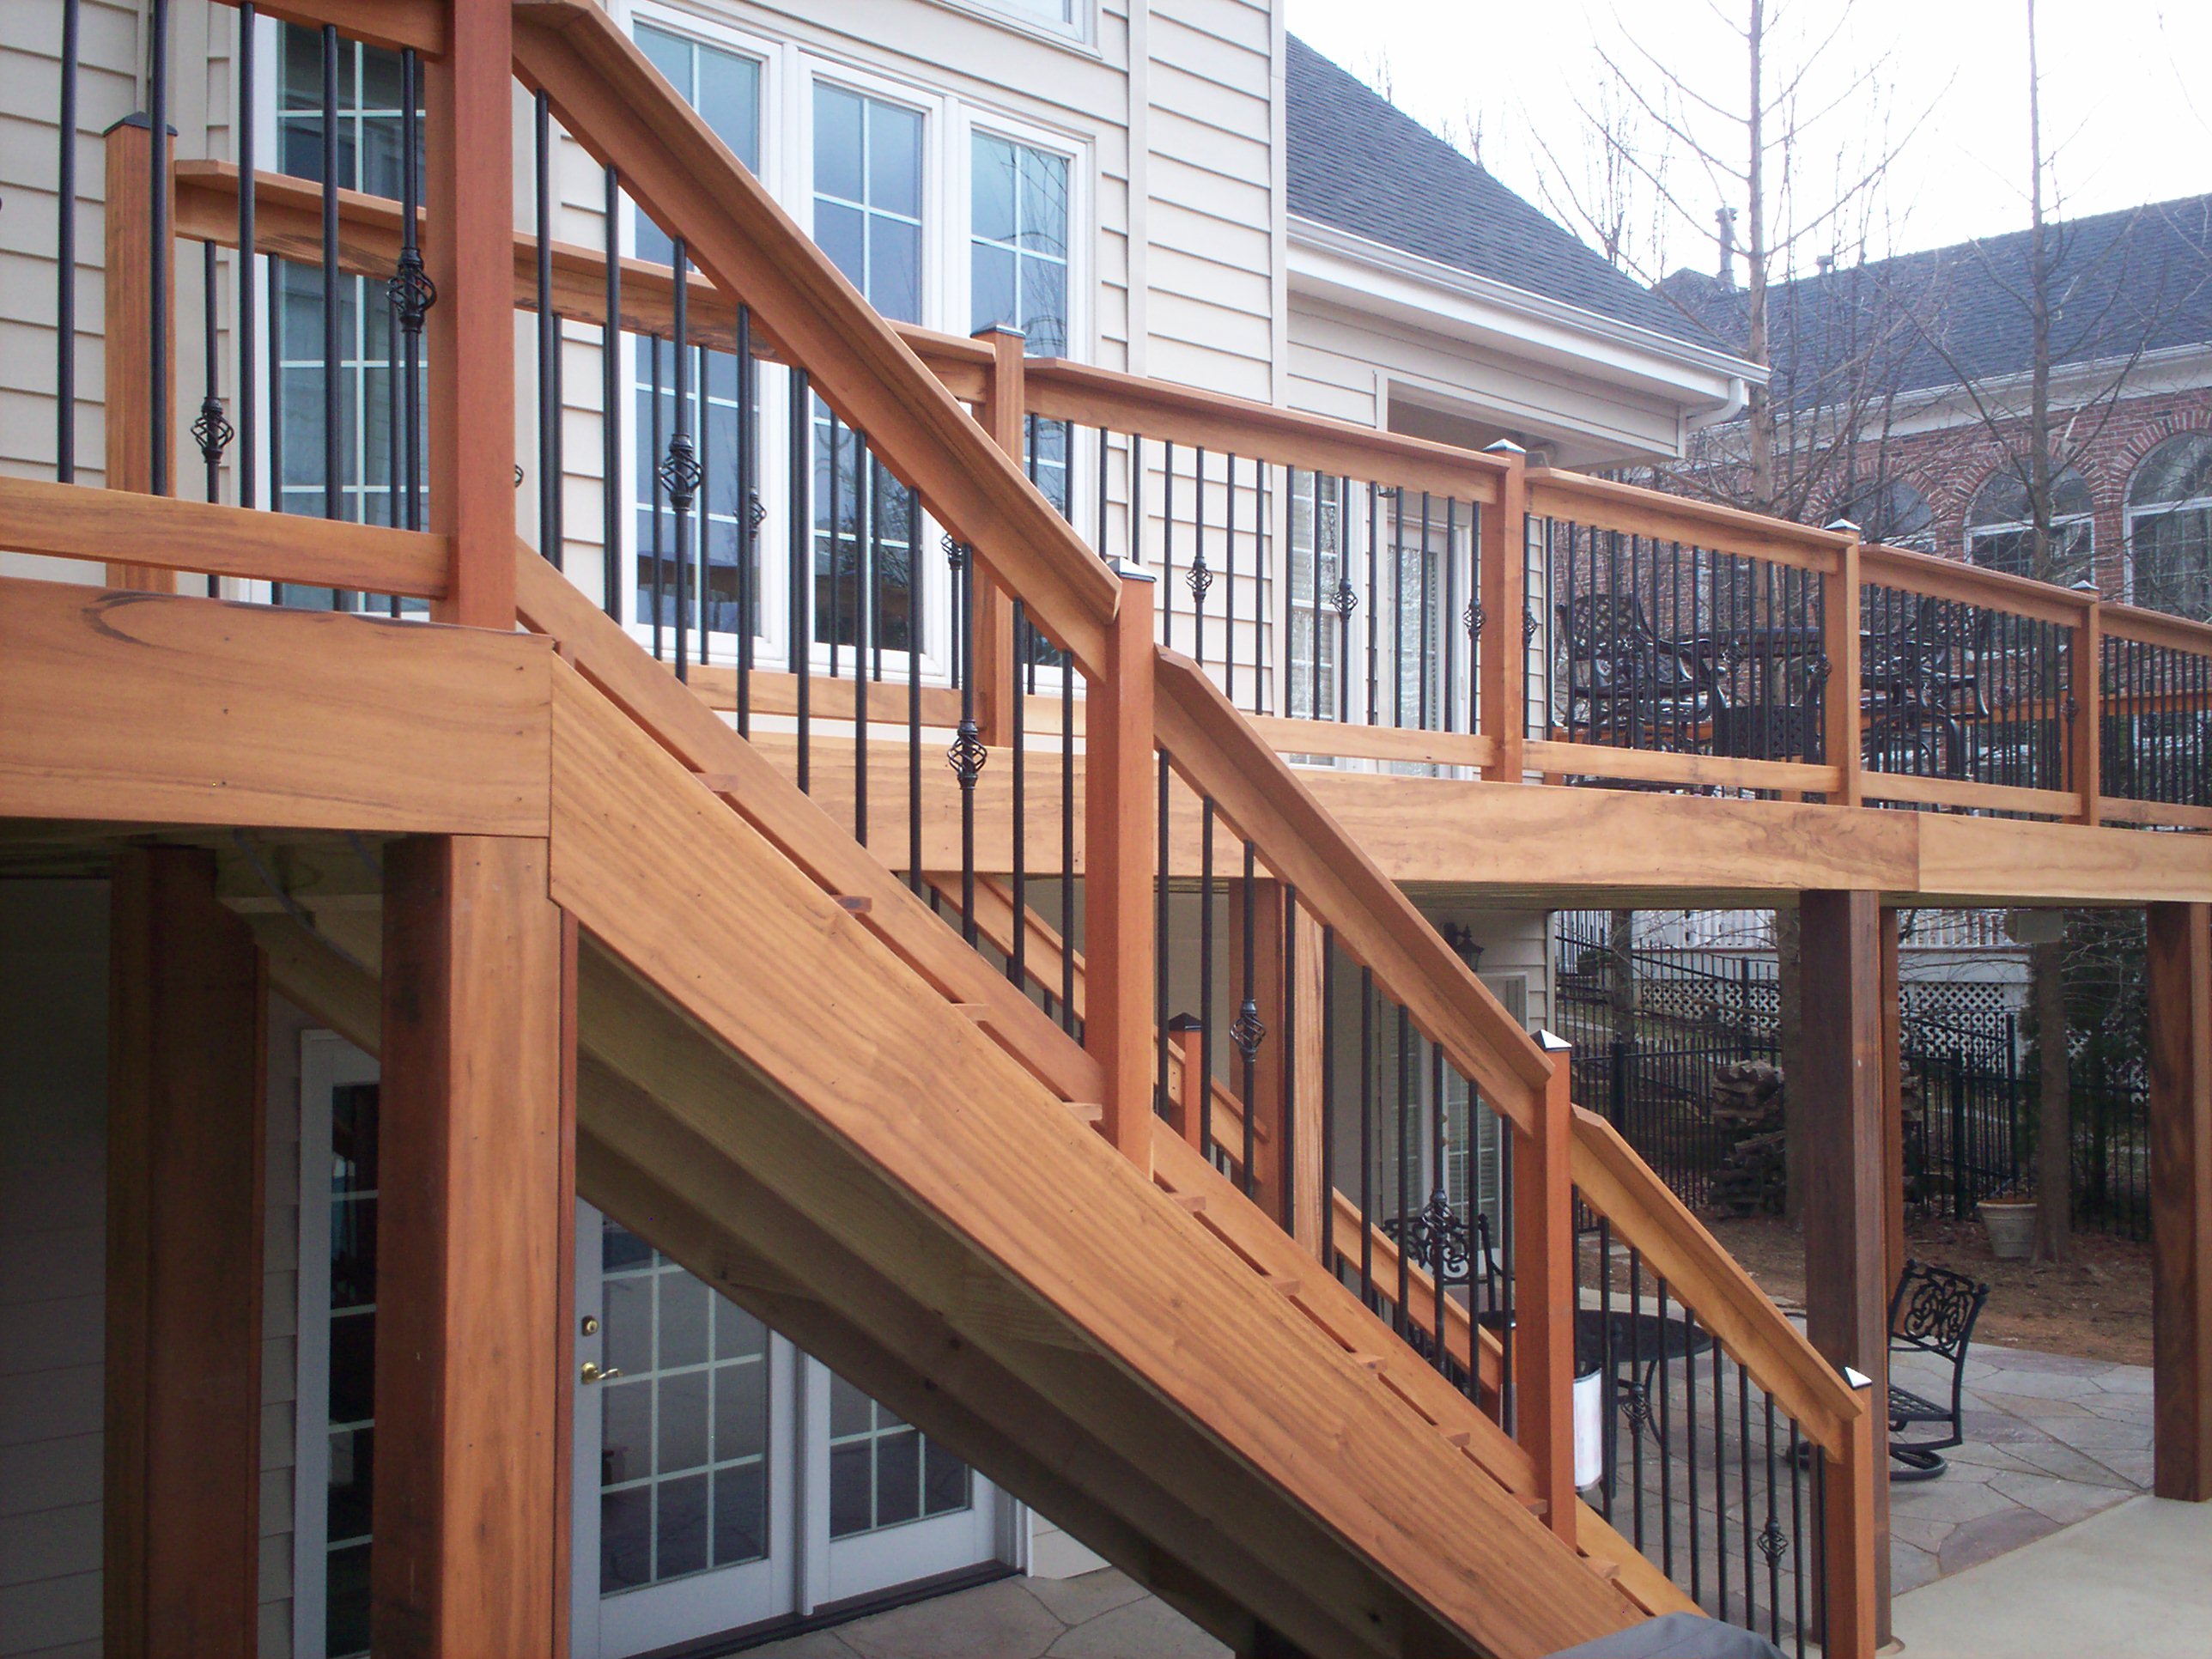 St. Louis Mo: Deck Design and Building Details by Archadeck | St. Louis decks, screened porches ...